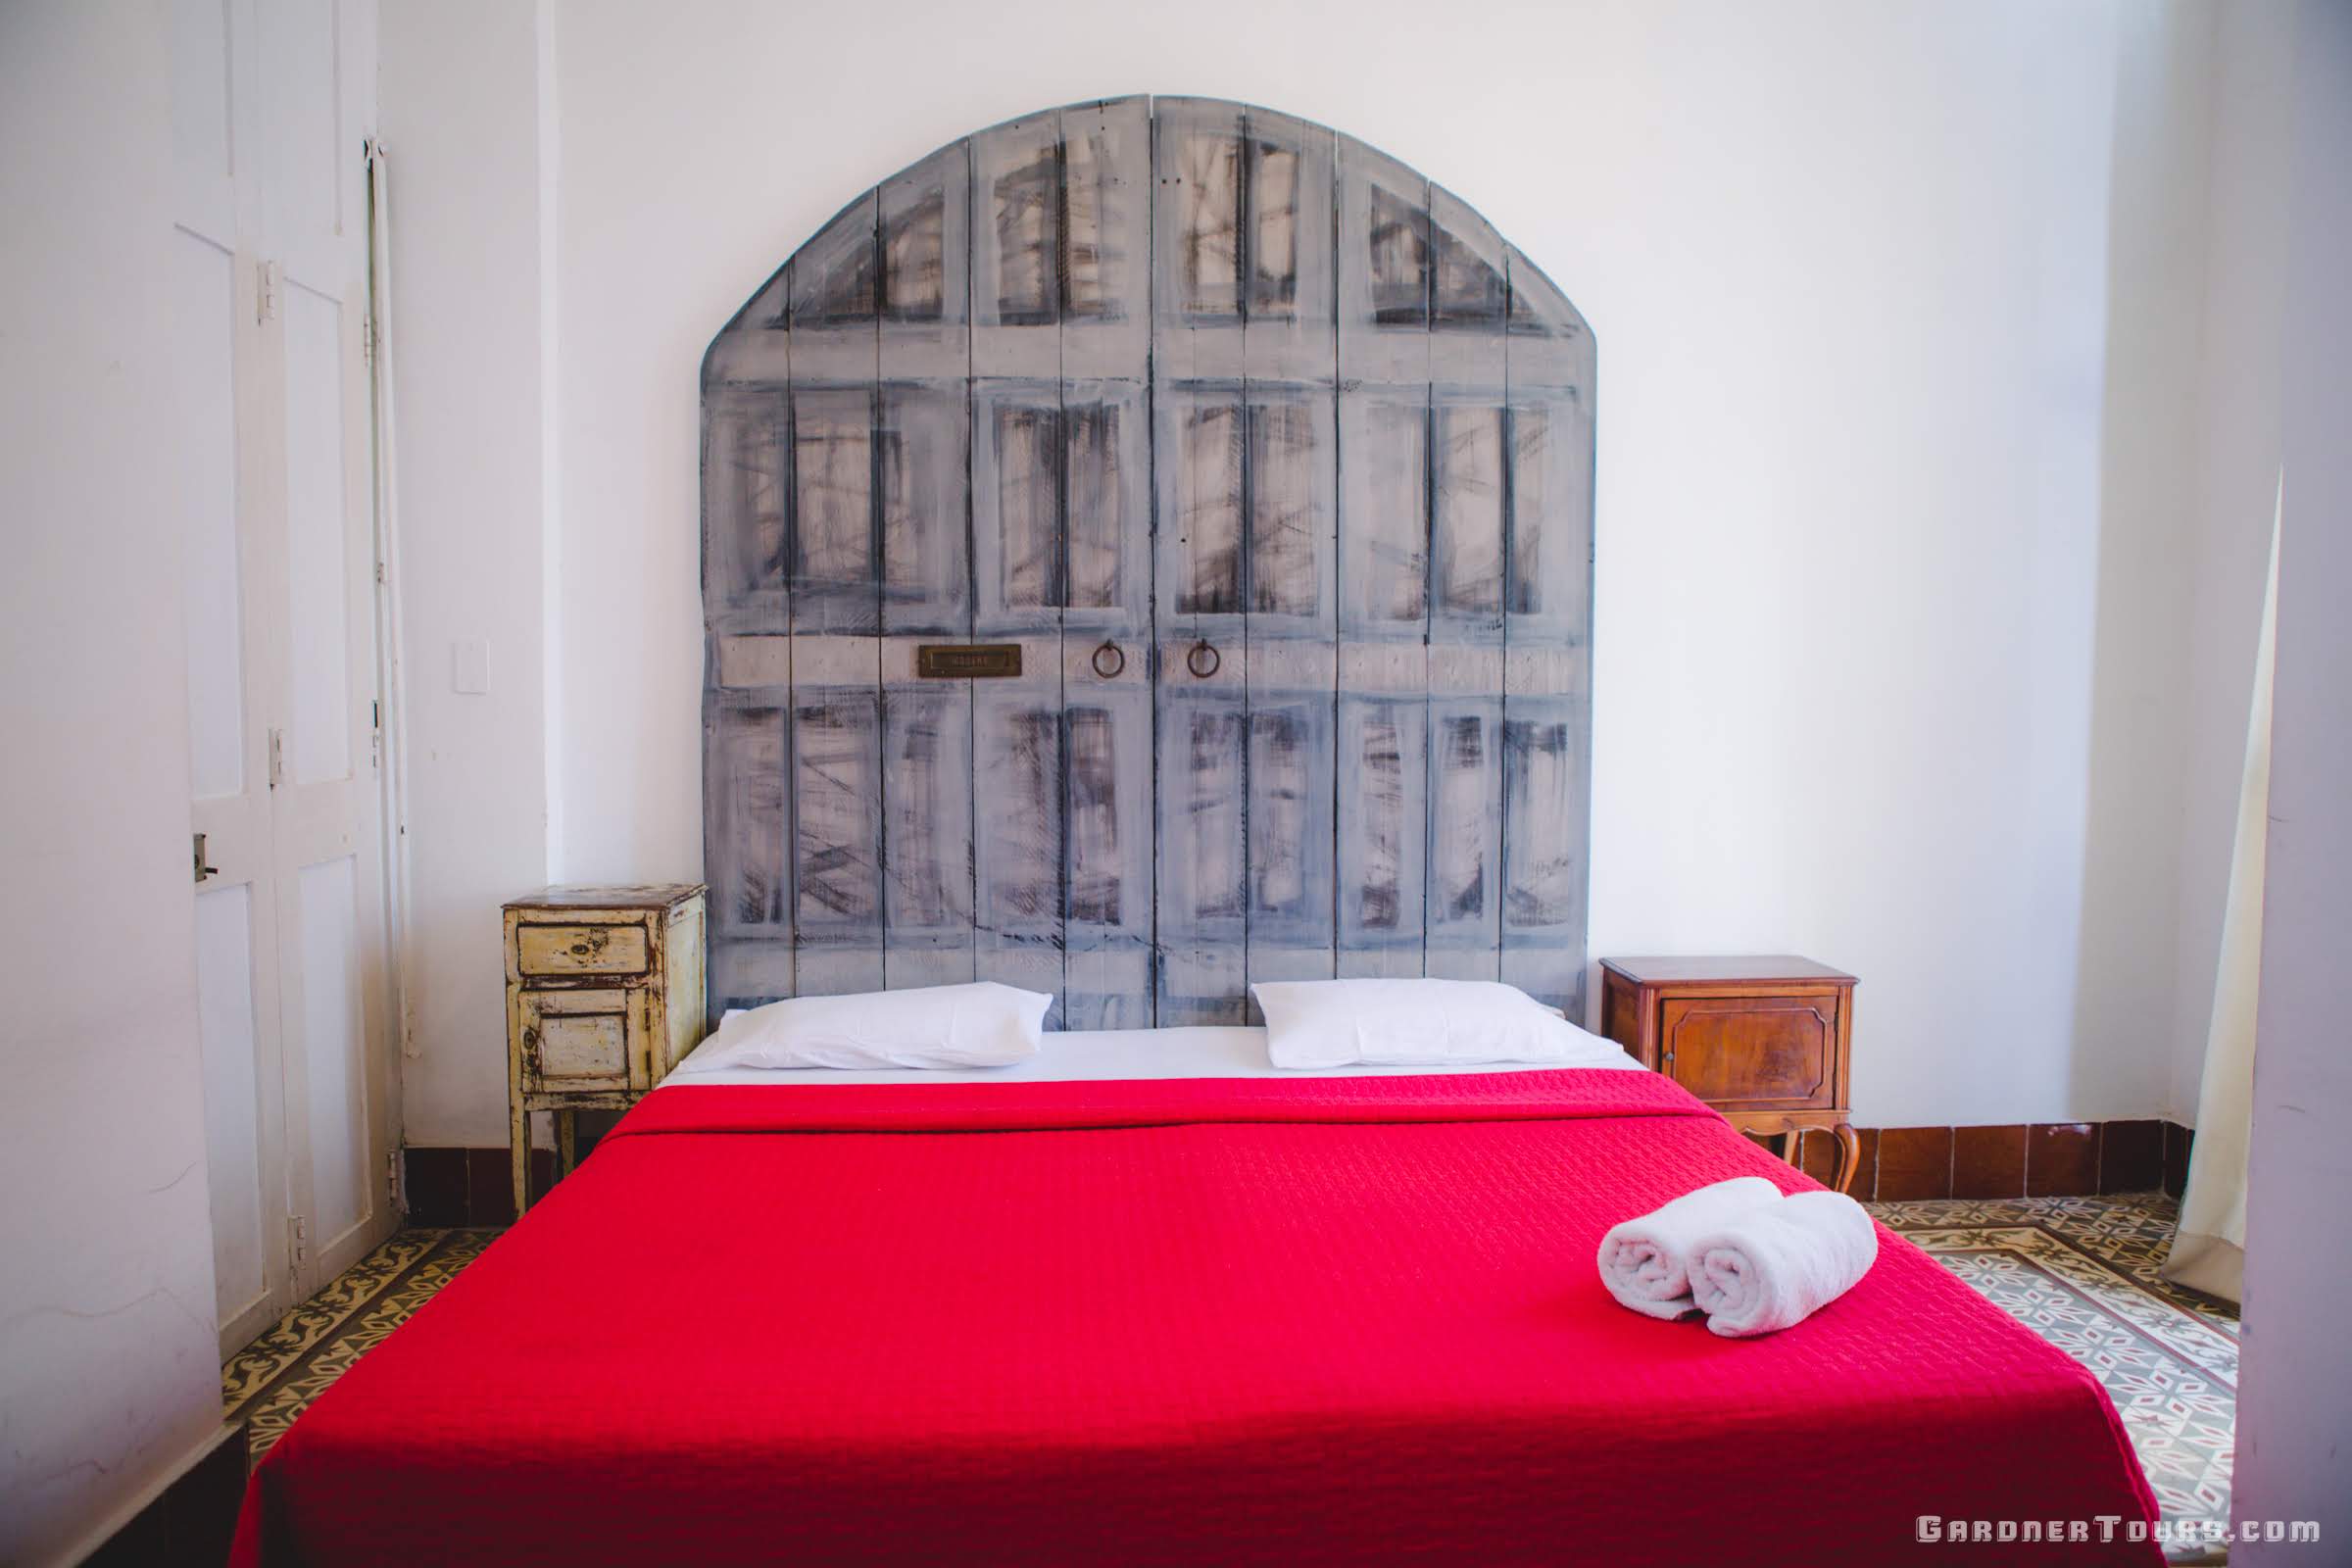 Comfortable Classic White and red Bedroom of a 3-star Casa Particular BnB in Old Havana, Cuba